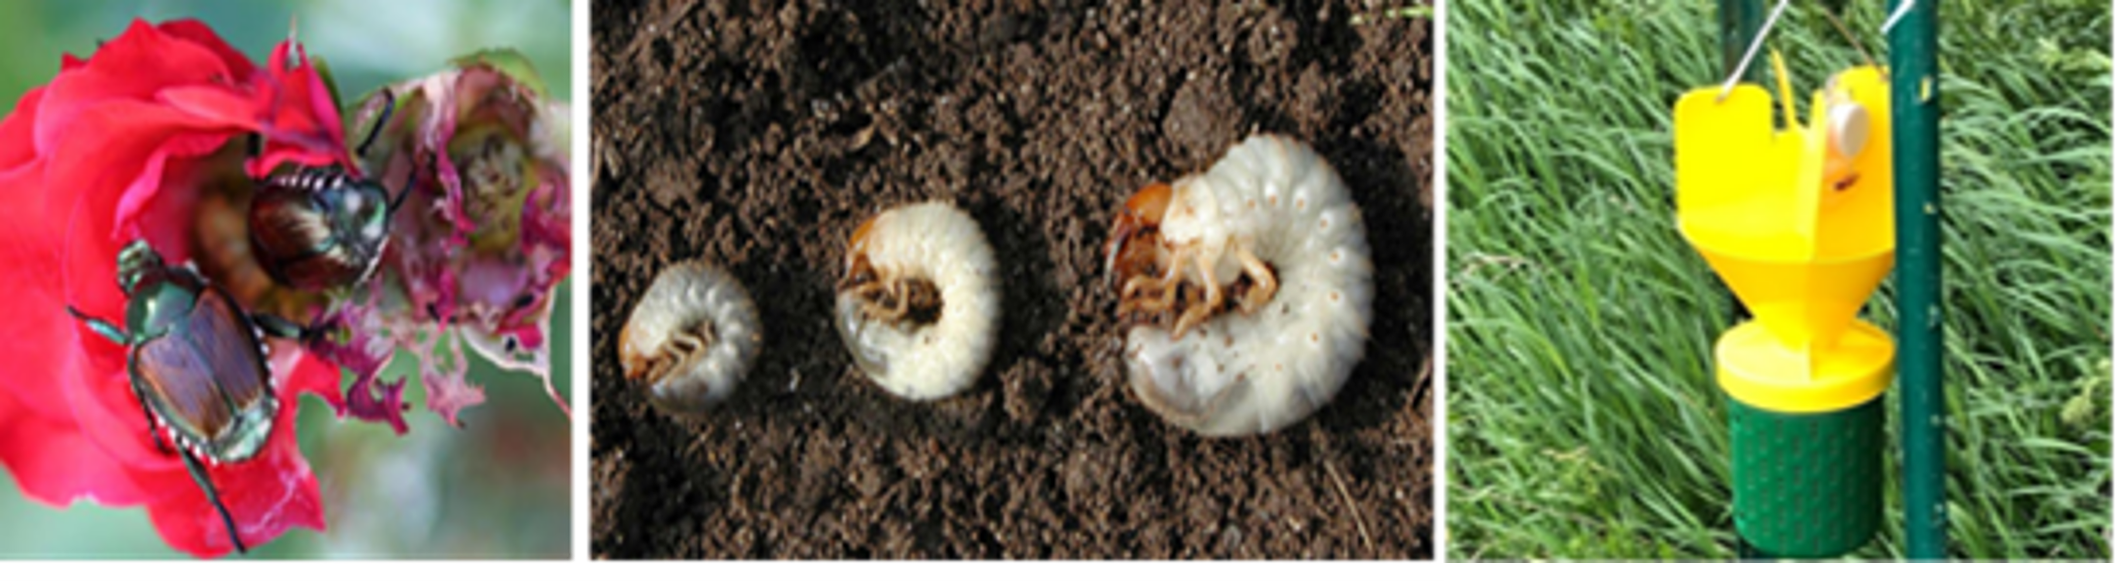 3 images, the first is beetles eating a rose flower, the second is three white grubs of varying sizes and the third is a plastic hanging trap